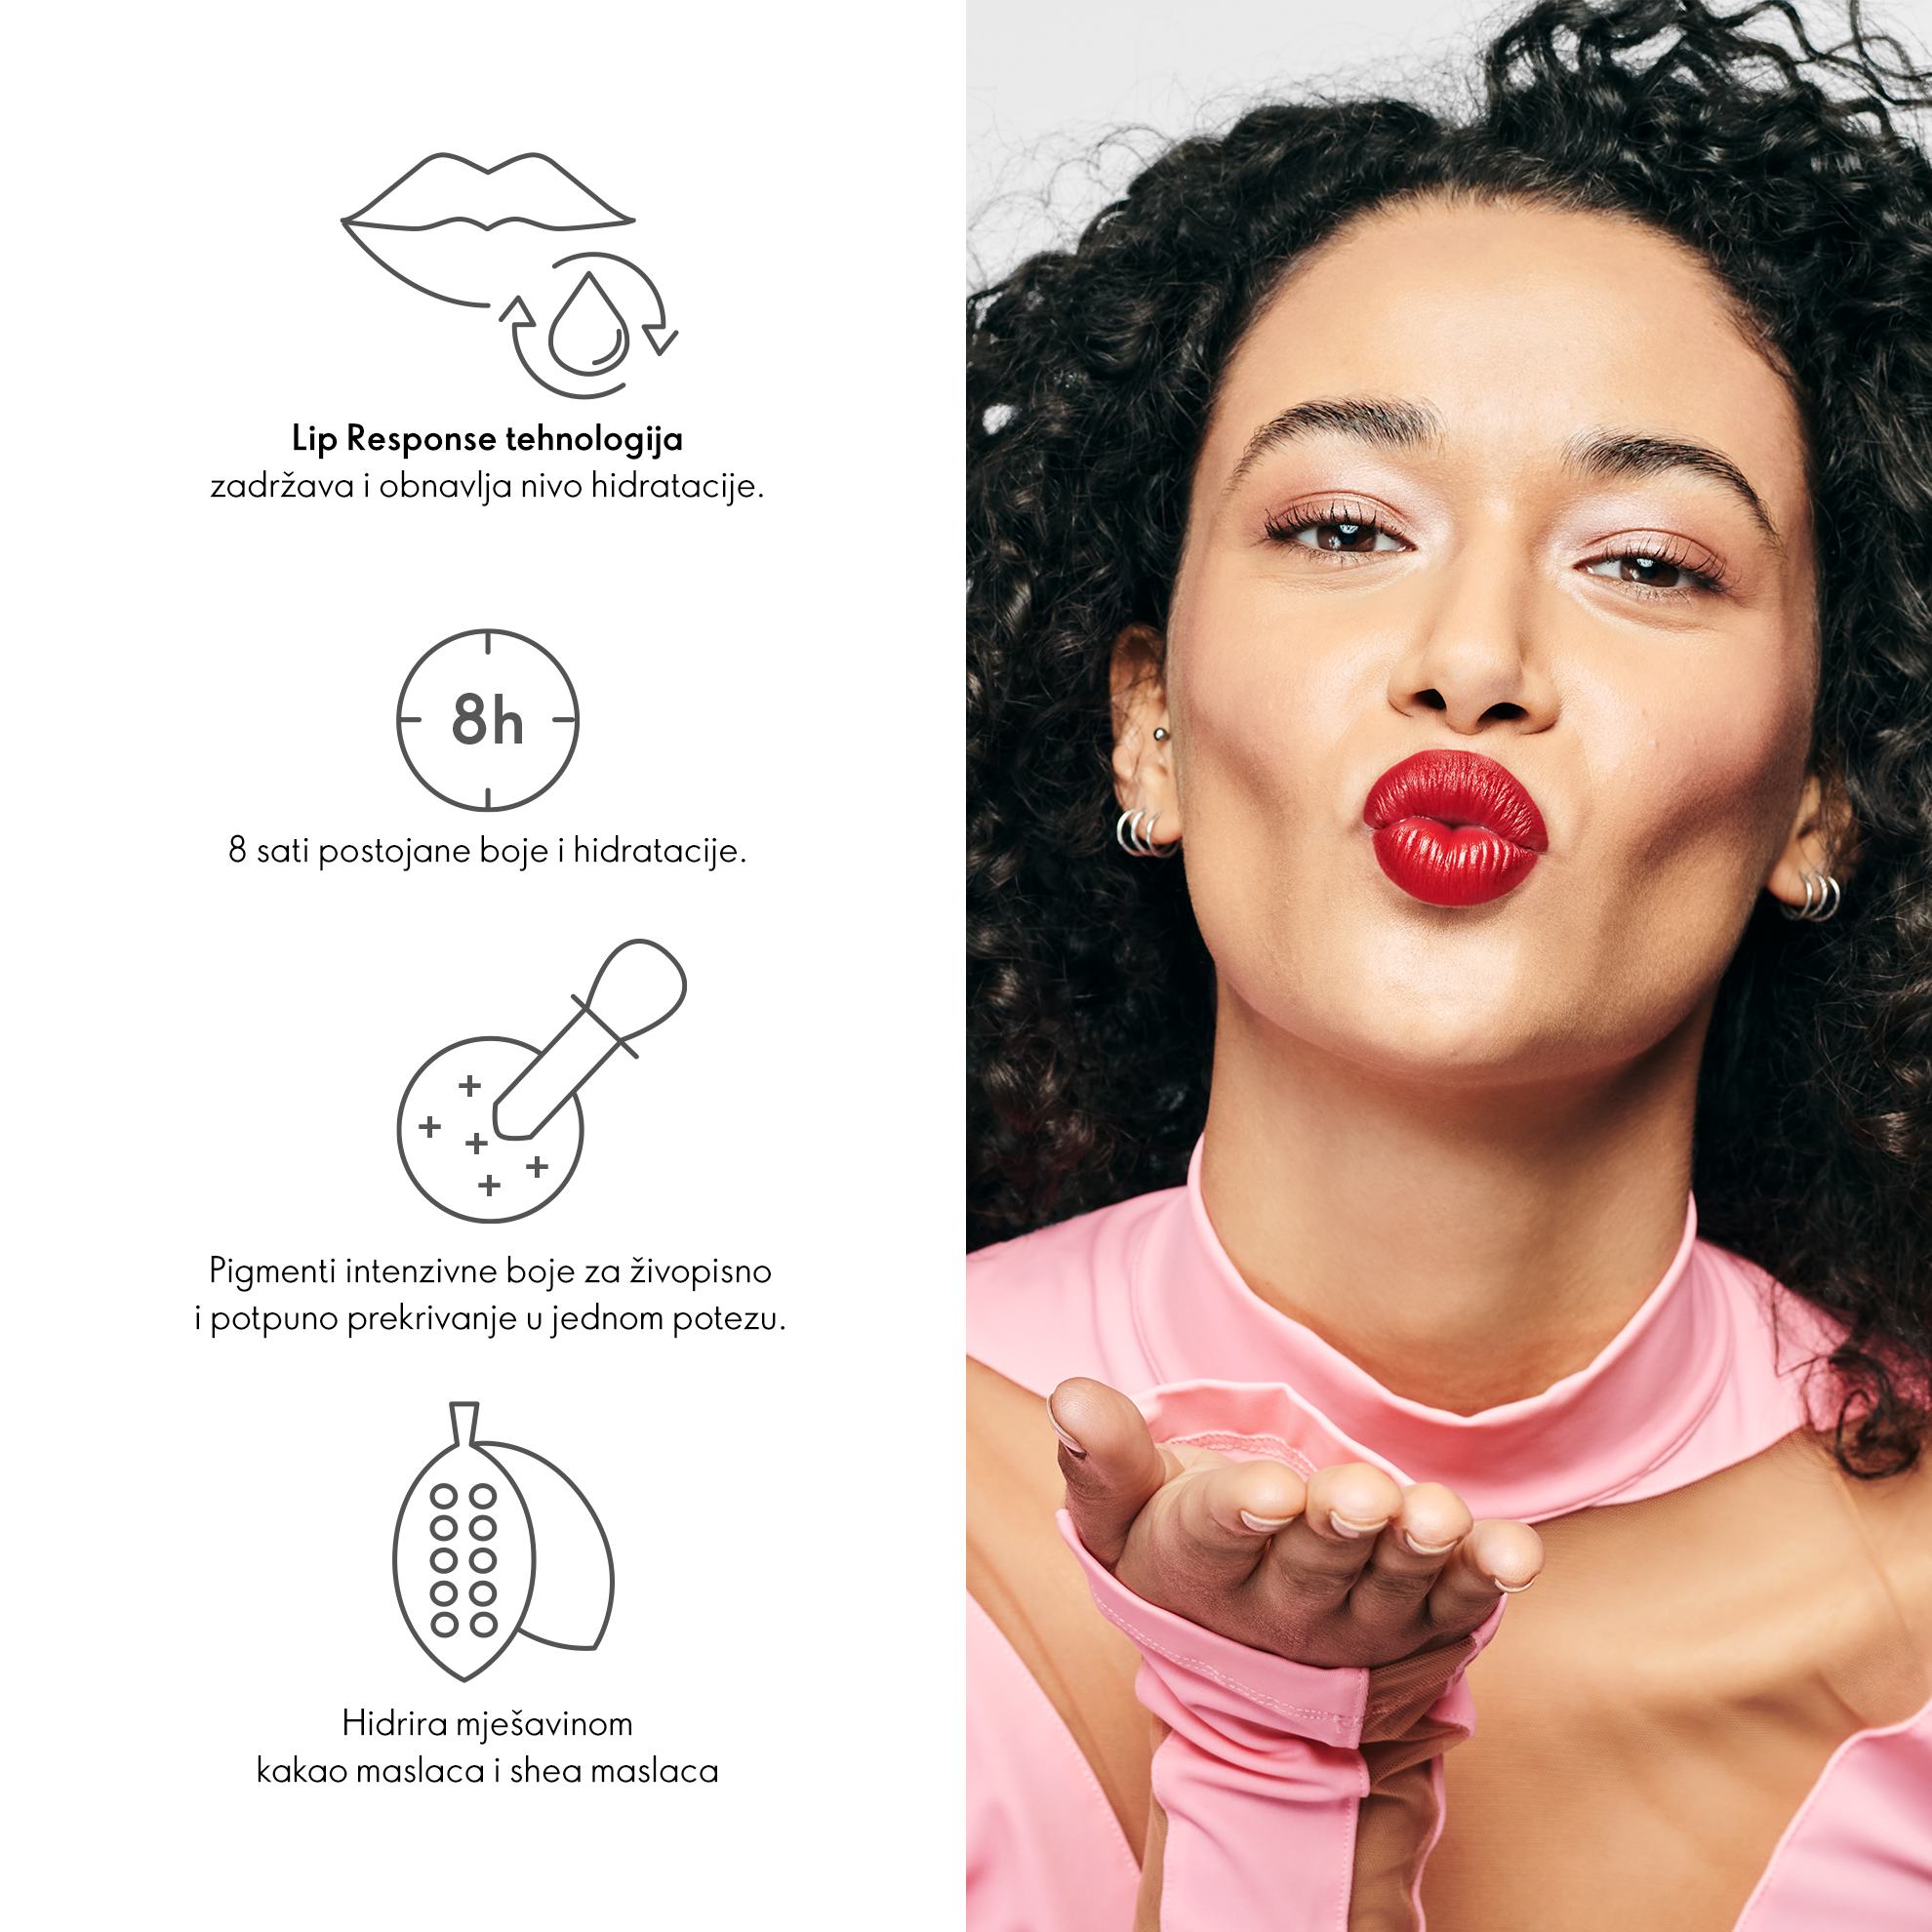 https://media-cdn.oriflame.com/productImage?externalMediaId=product-management-media%2fProducts%2f46439%2fBA%2f46439_2.png&id=18912799&version=3